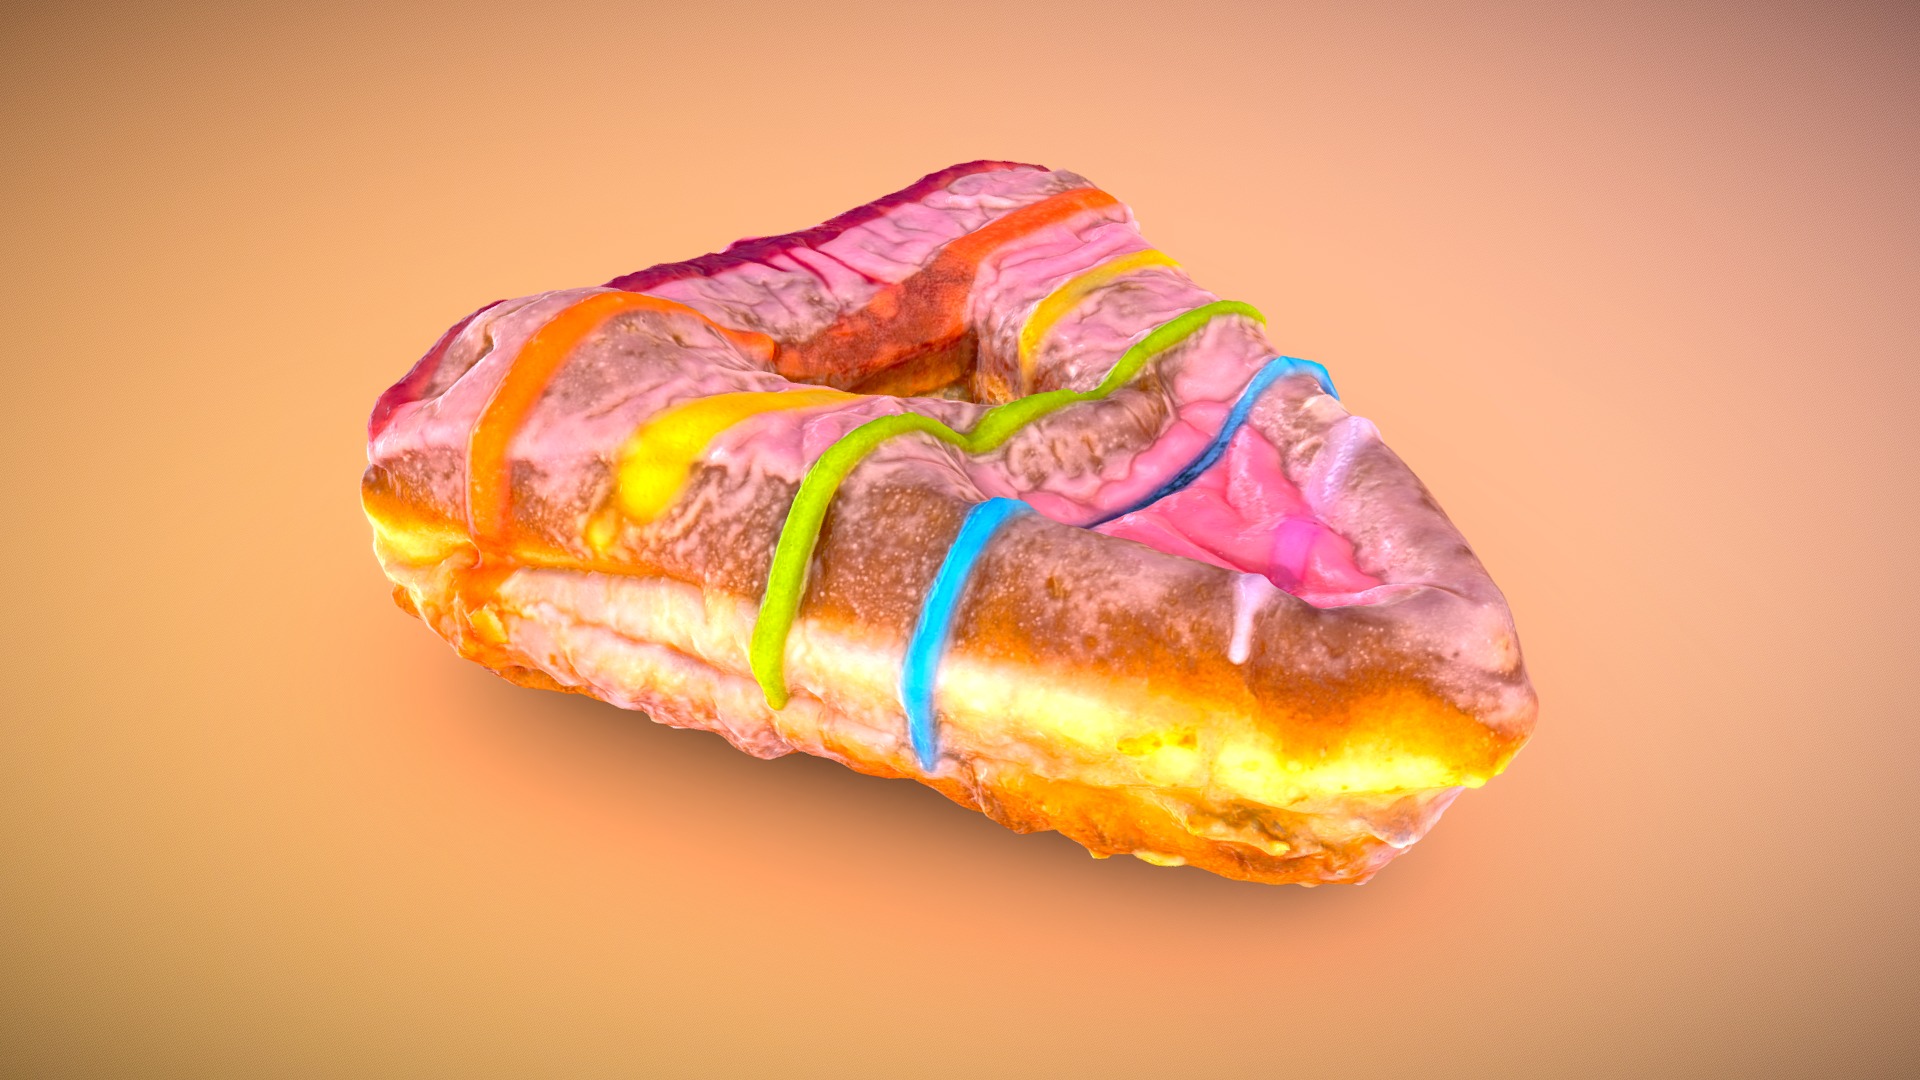 3D model Doughnut Plant Pride - This is a 3D model of the Doughnut Plant Pride. The 3D model is about a colorful pastry with sprinkles.